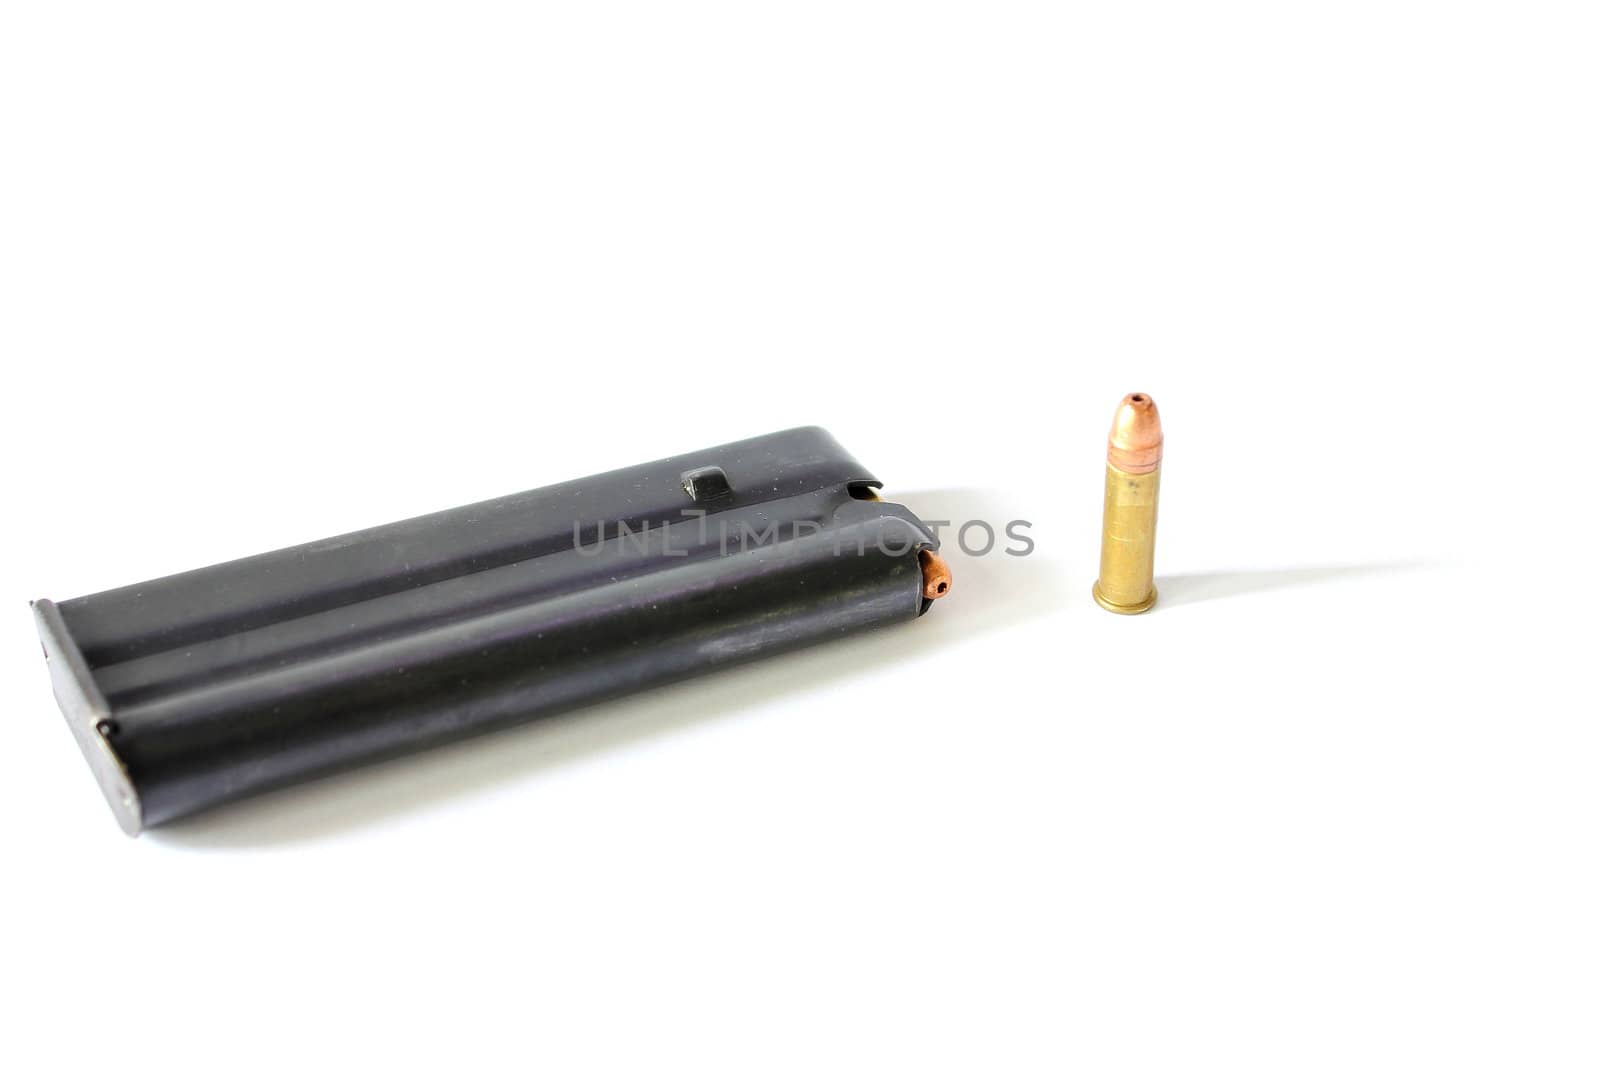 Isolated .22 caliber bullet with clip